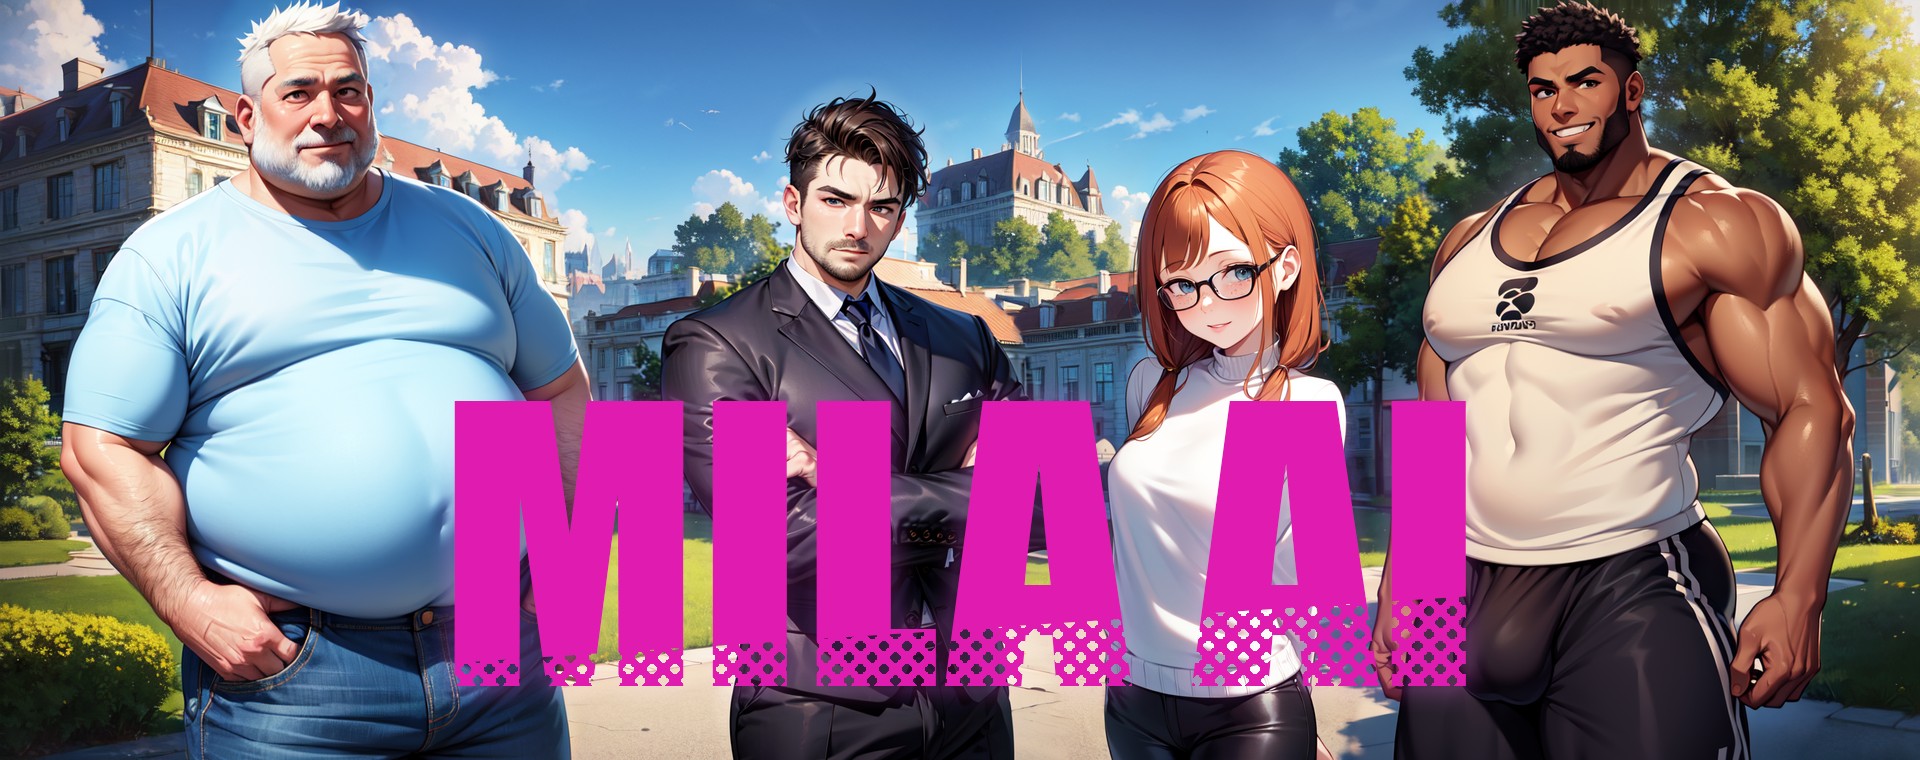 Mila Ai Adult Game Android Apk Download (1)